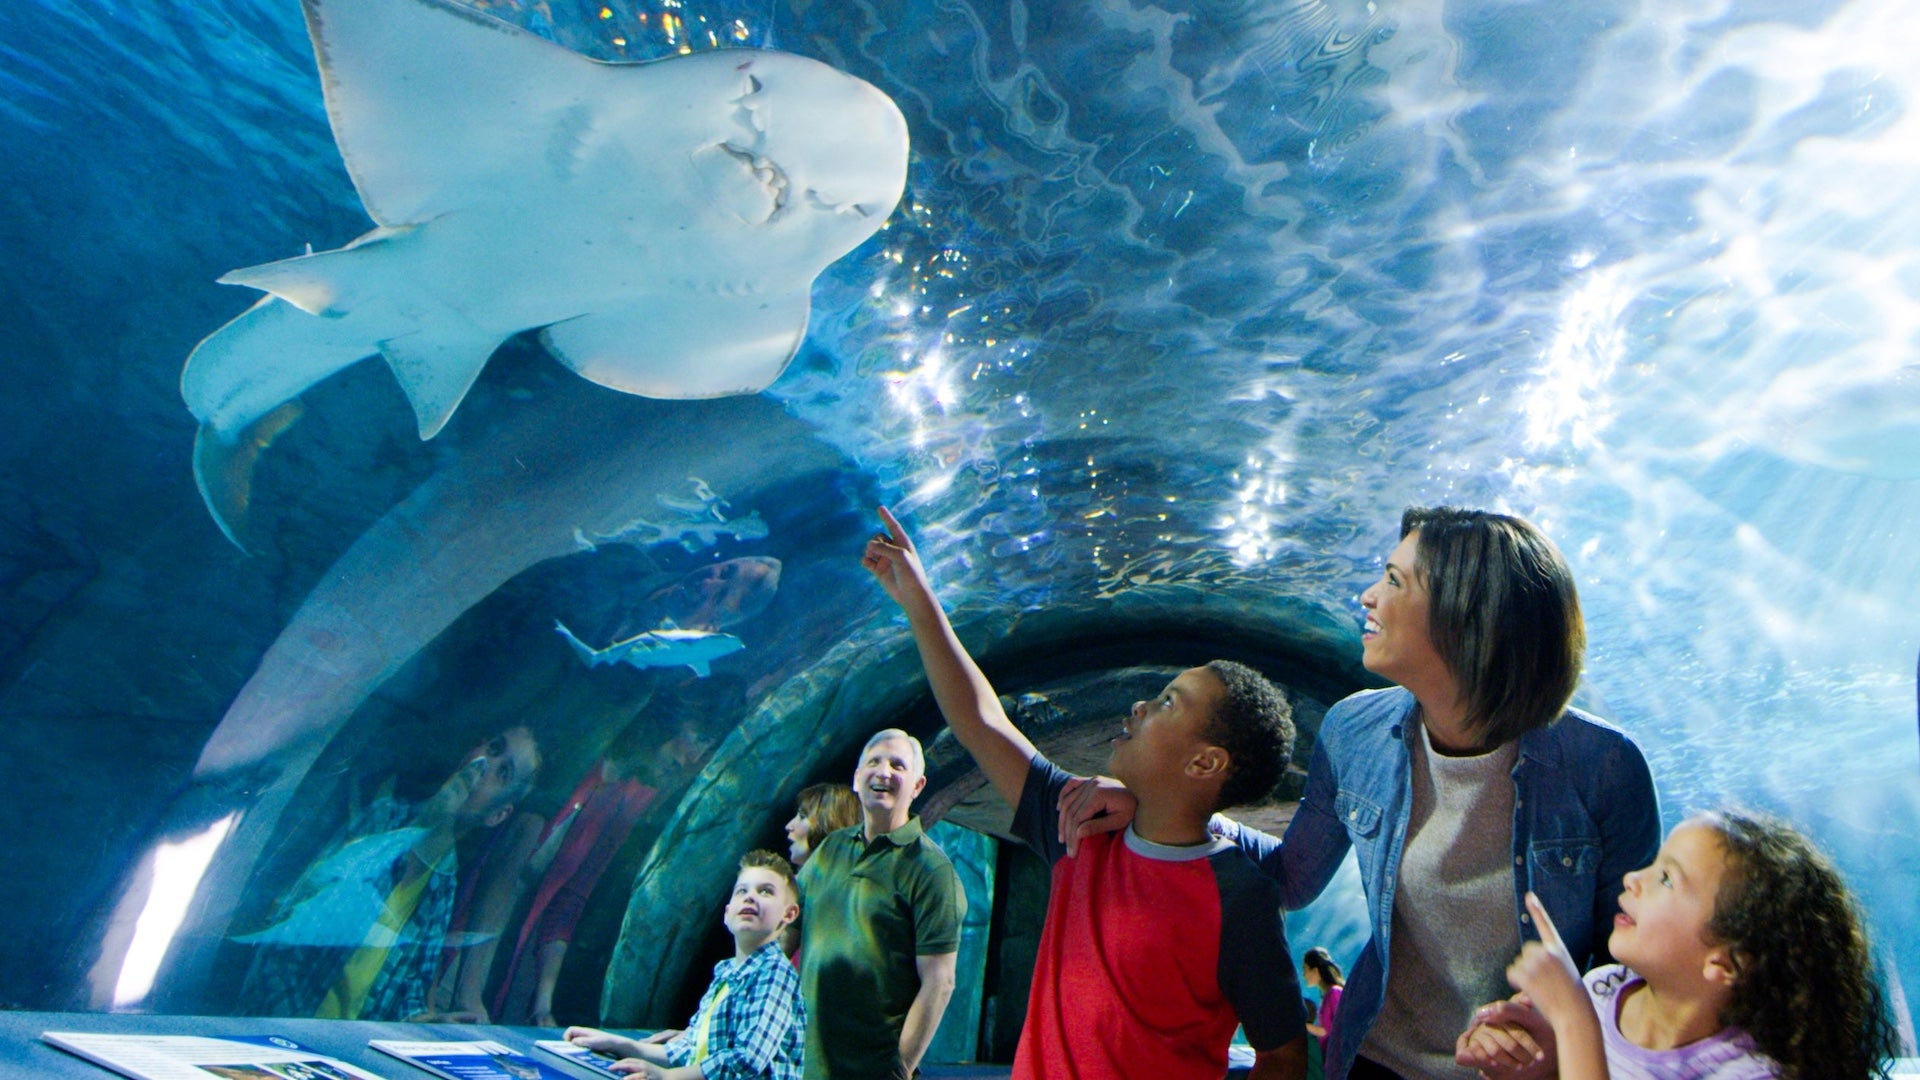 Family pointing and looking at a Ray inside an aquarium tunnel